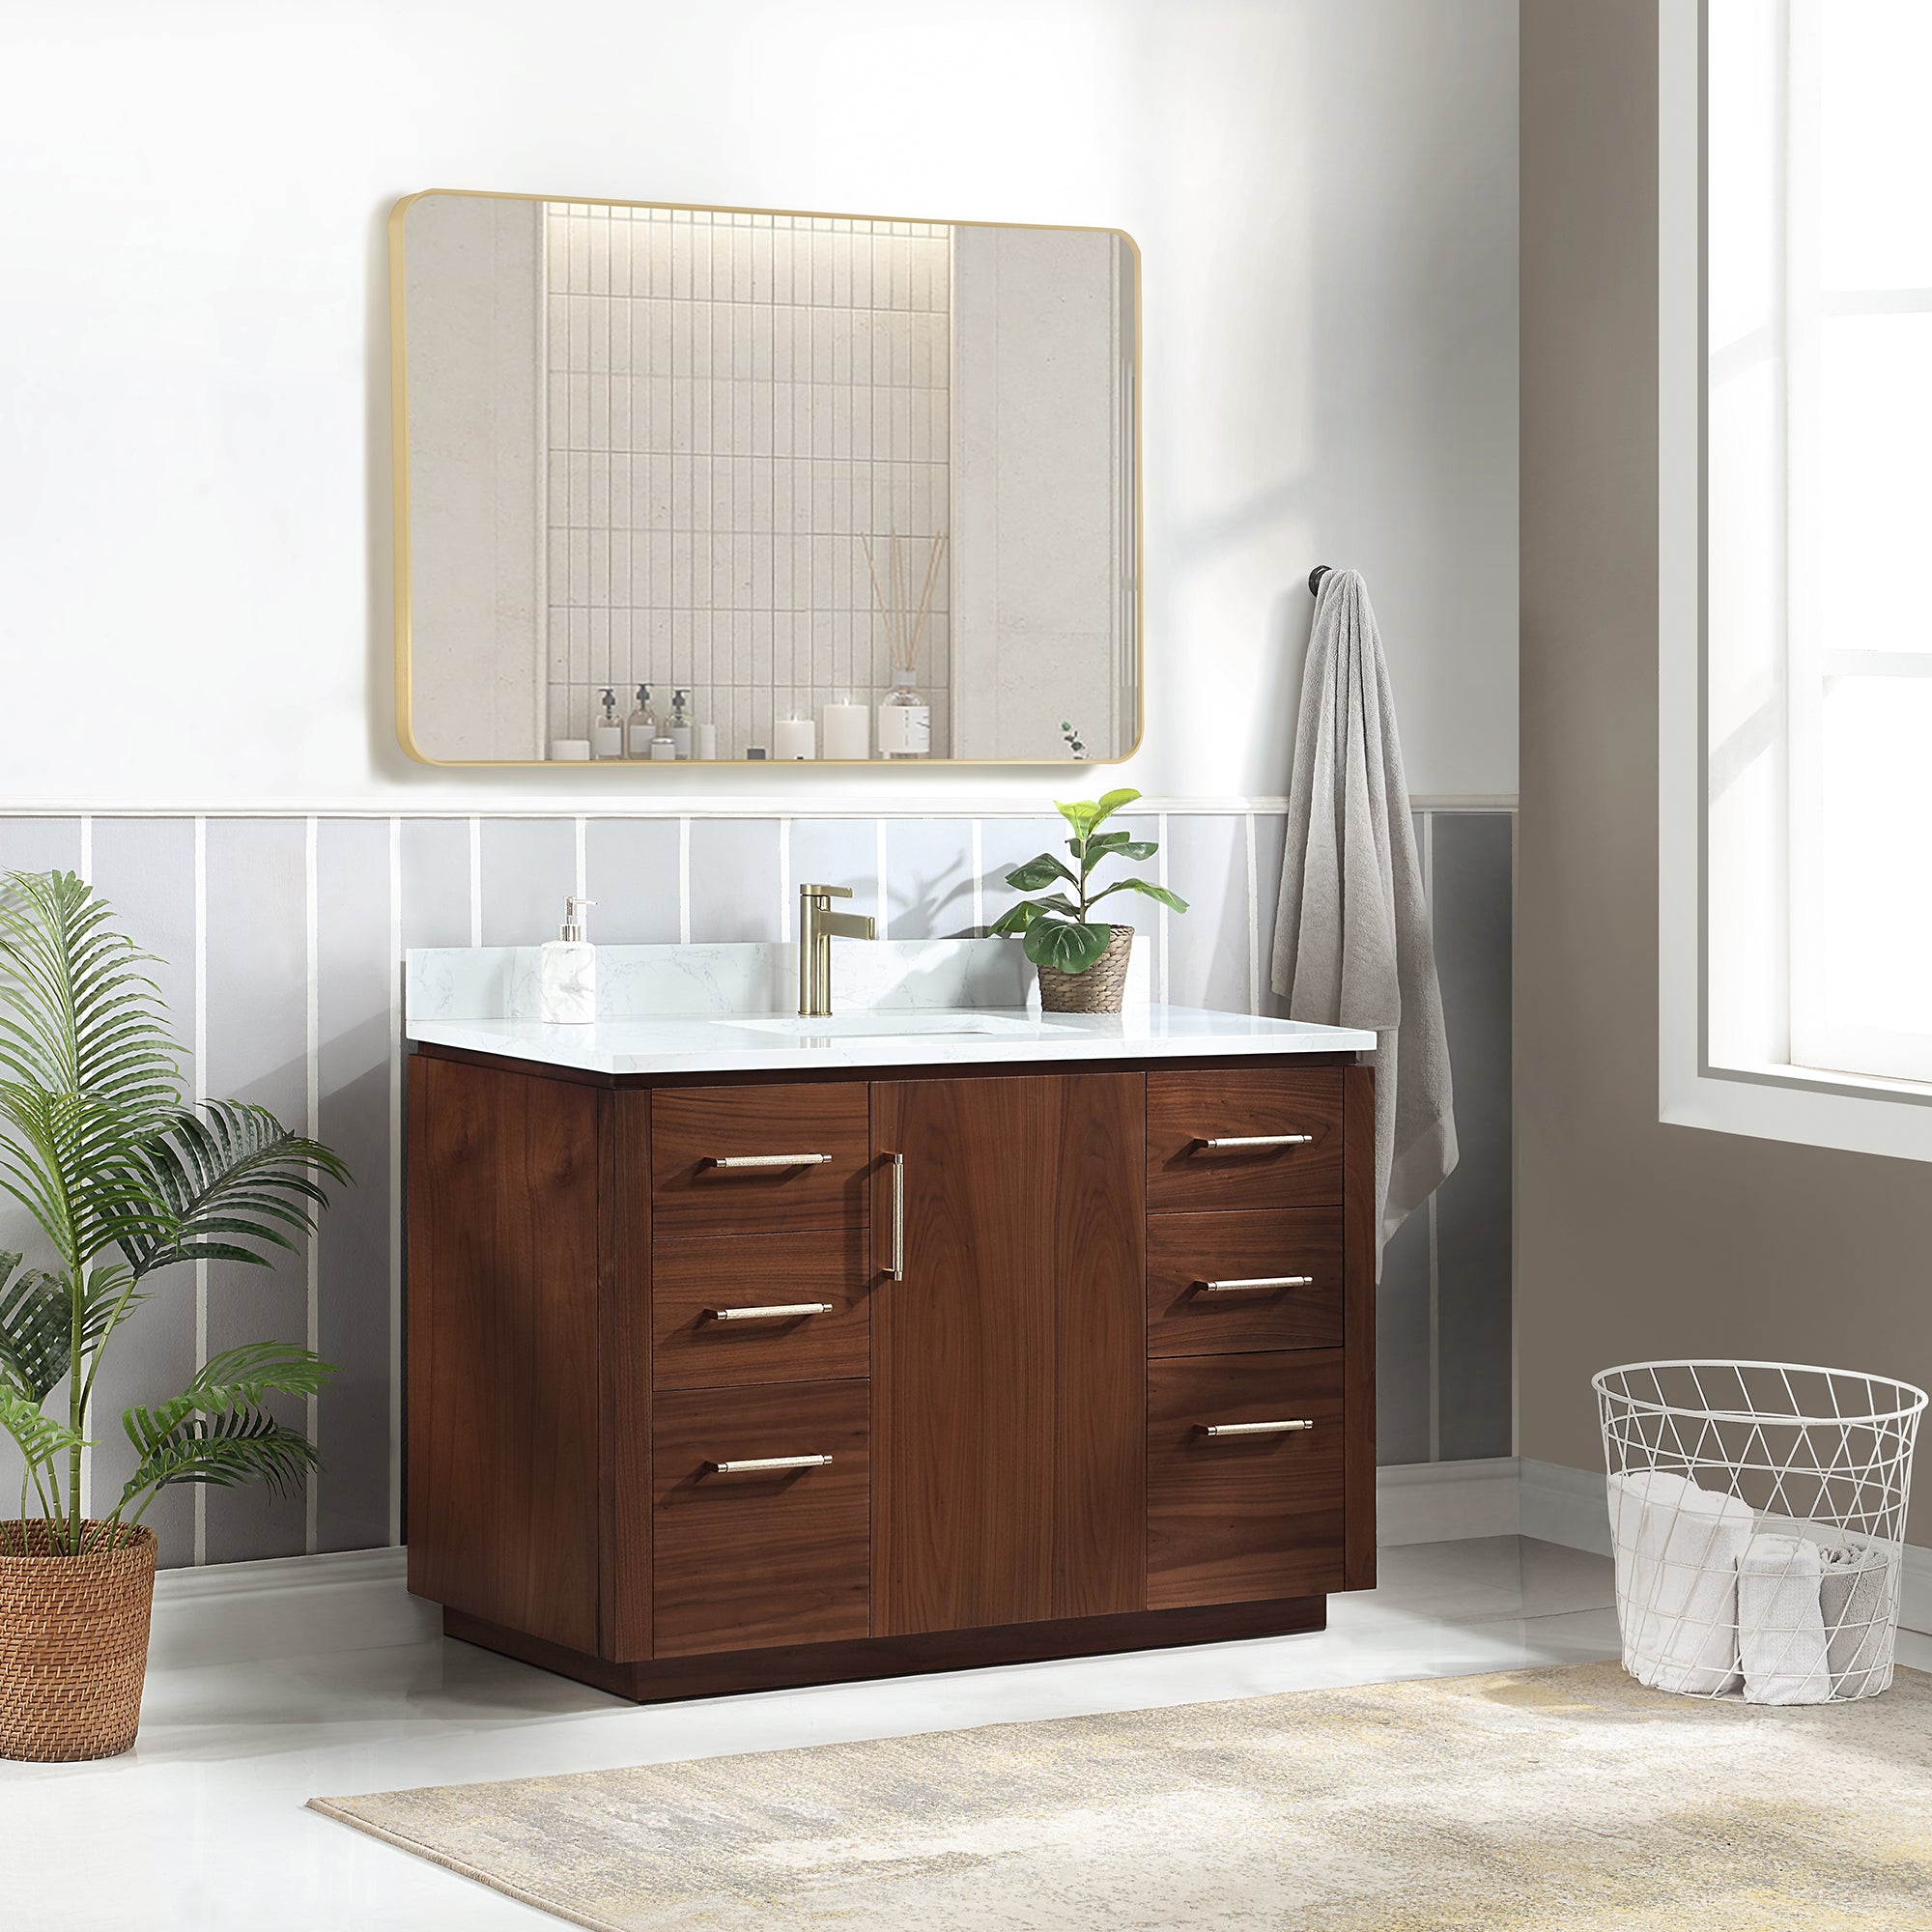 San 48" Free-standing Single Bath Vanity in Natural Walnut with White Grain Composite Stone Top